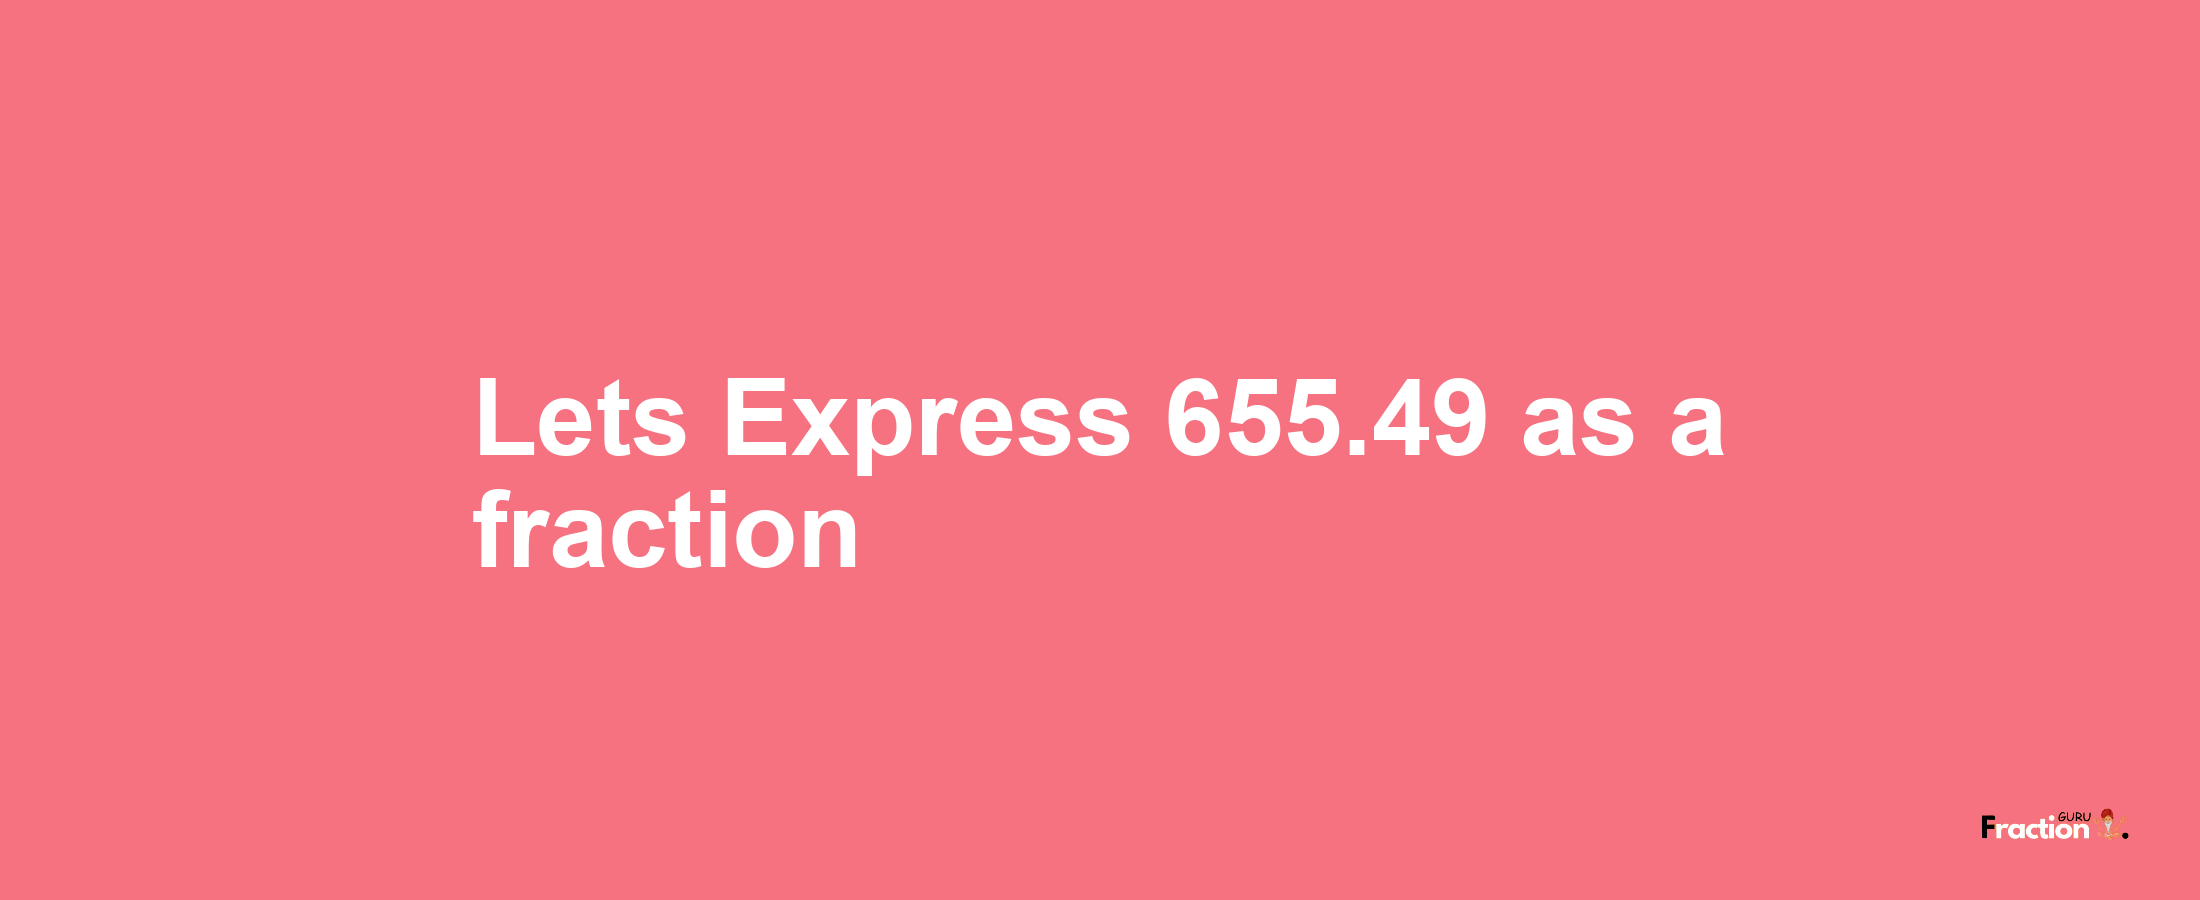 Lets Express 655.49 as afraction